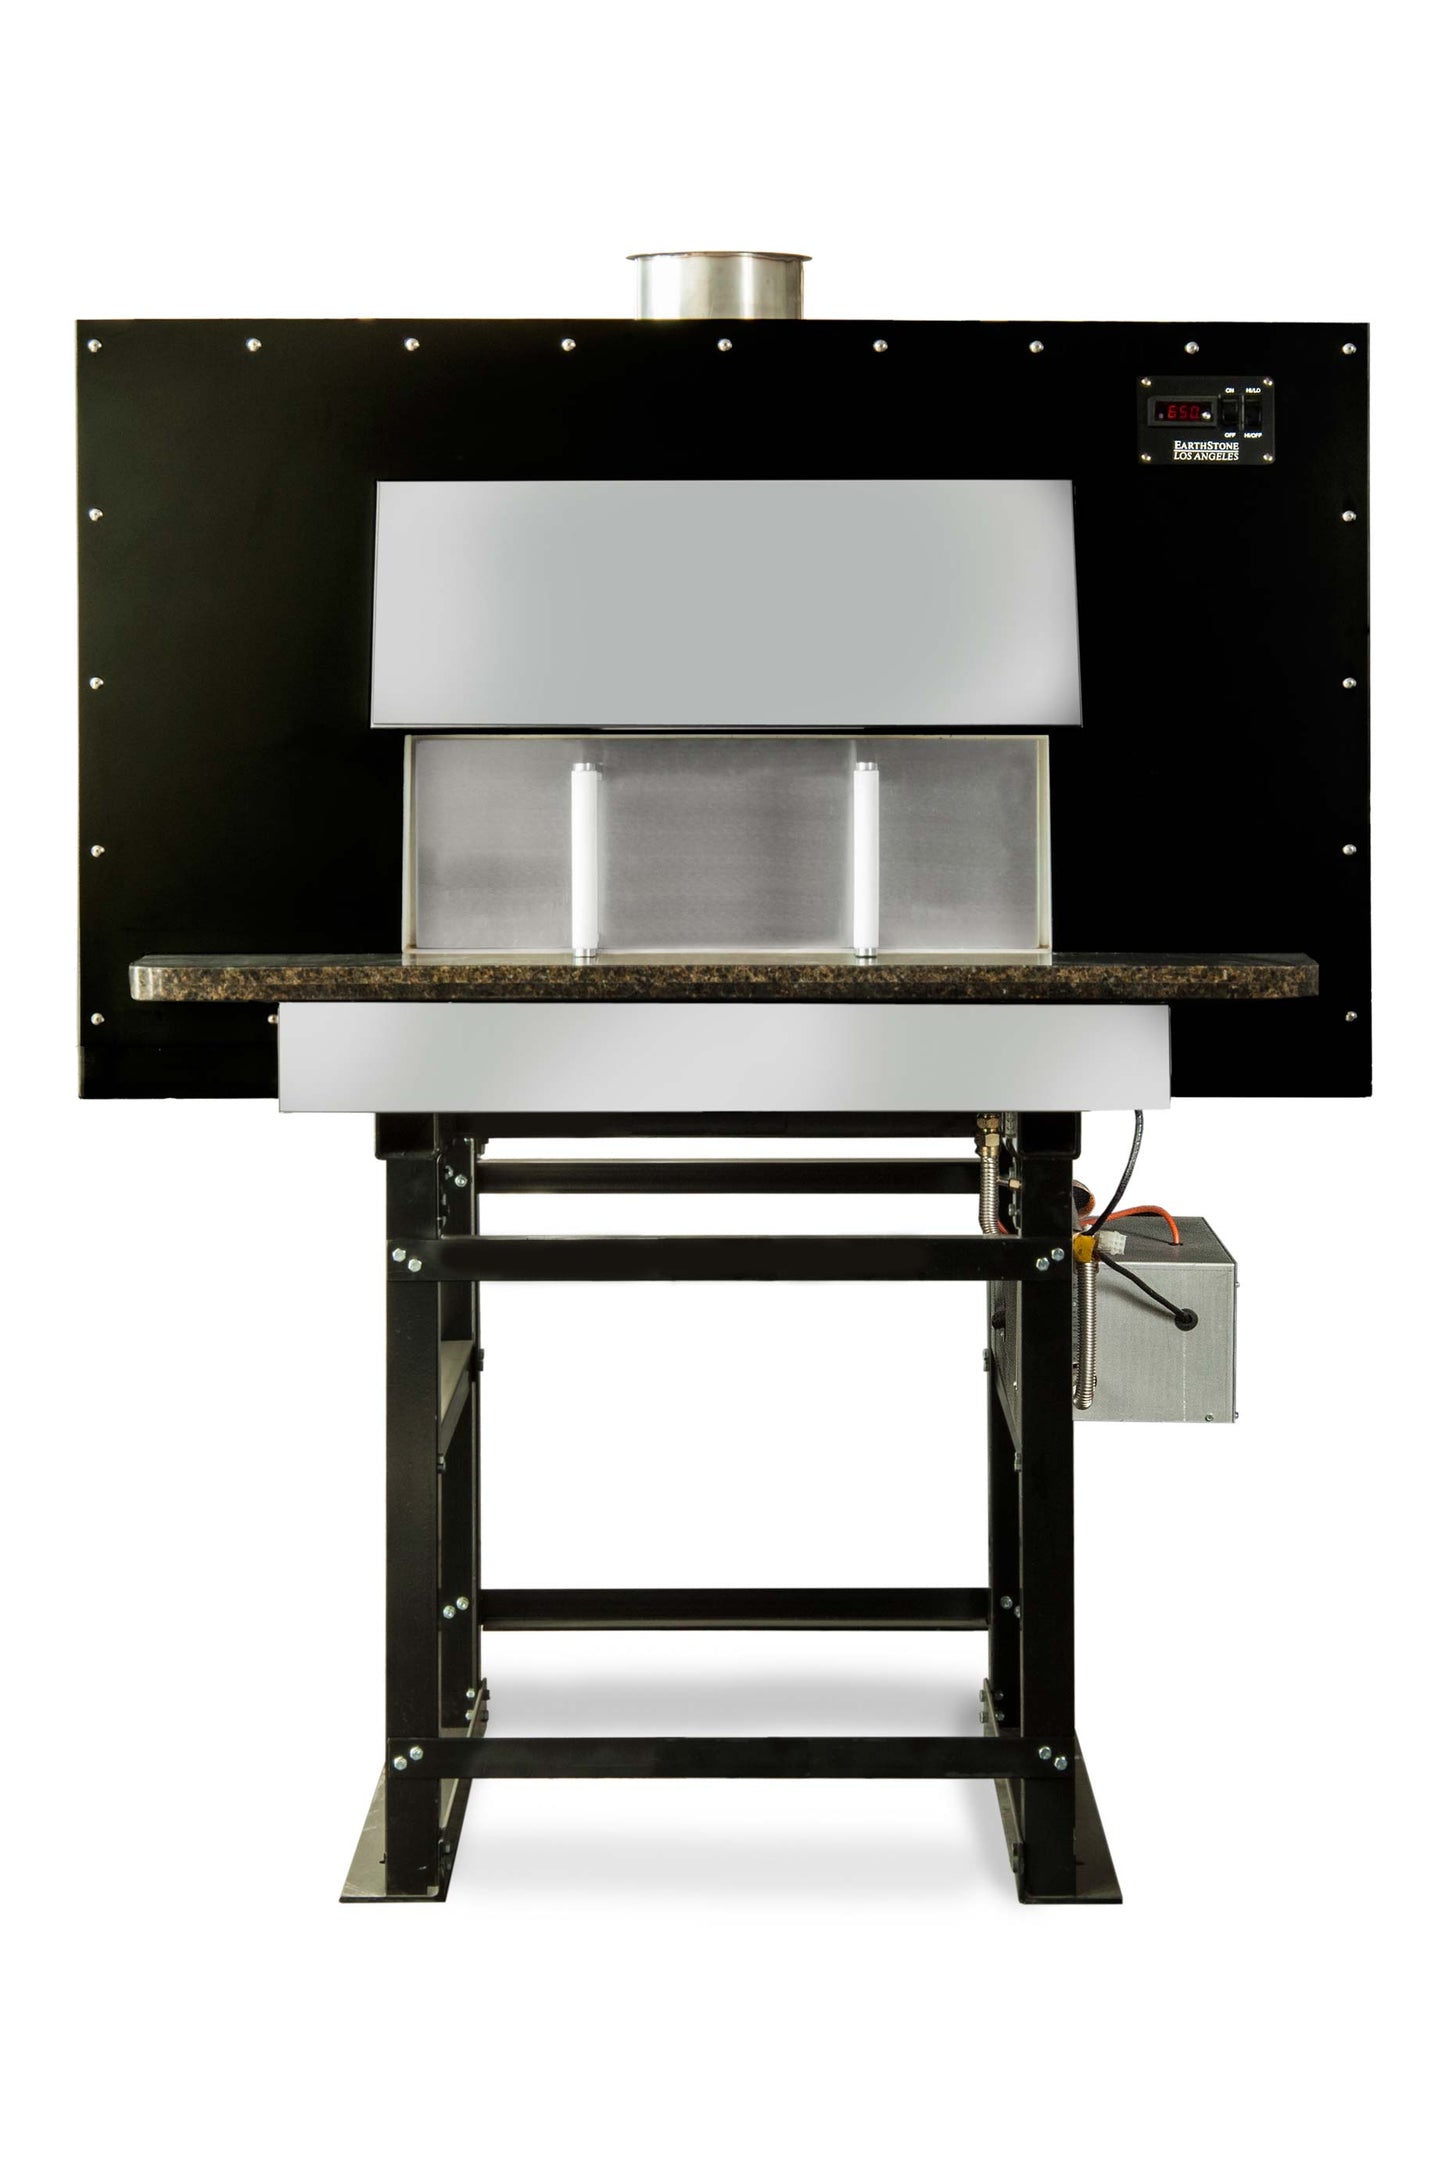 Earthstone 90-Due-PA Wood Fired Pre-assembled Oven